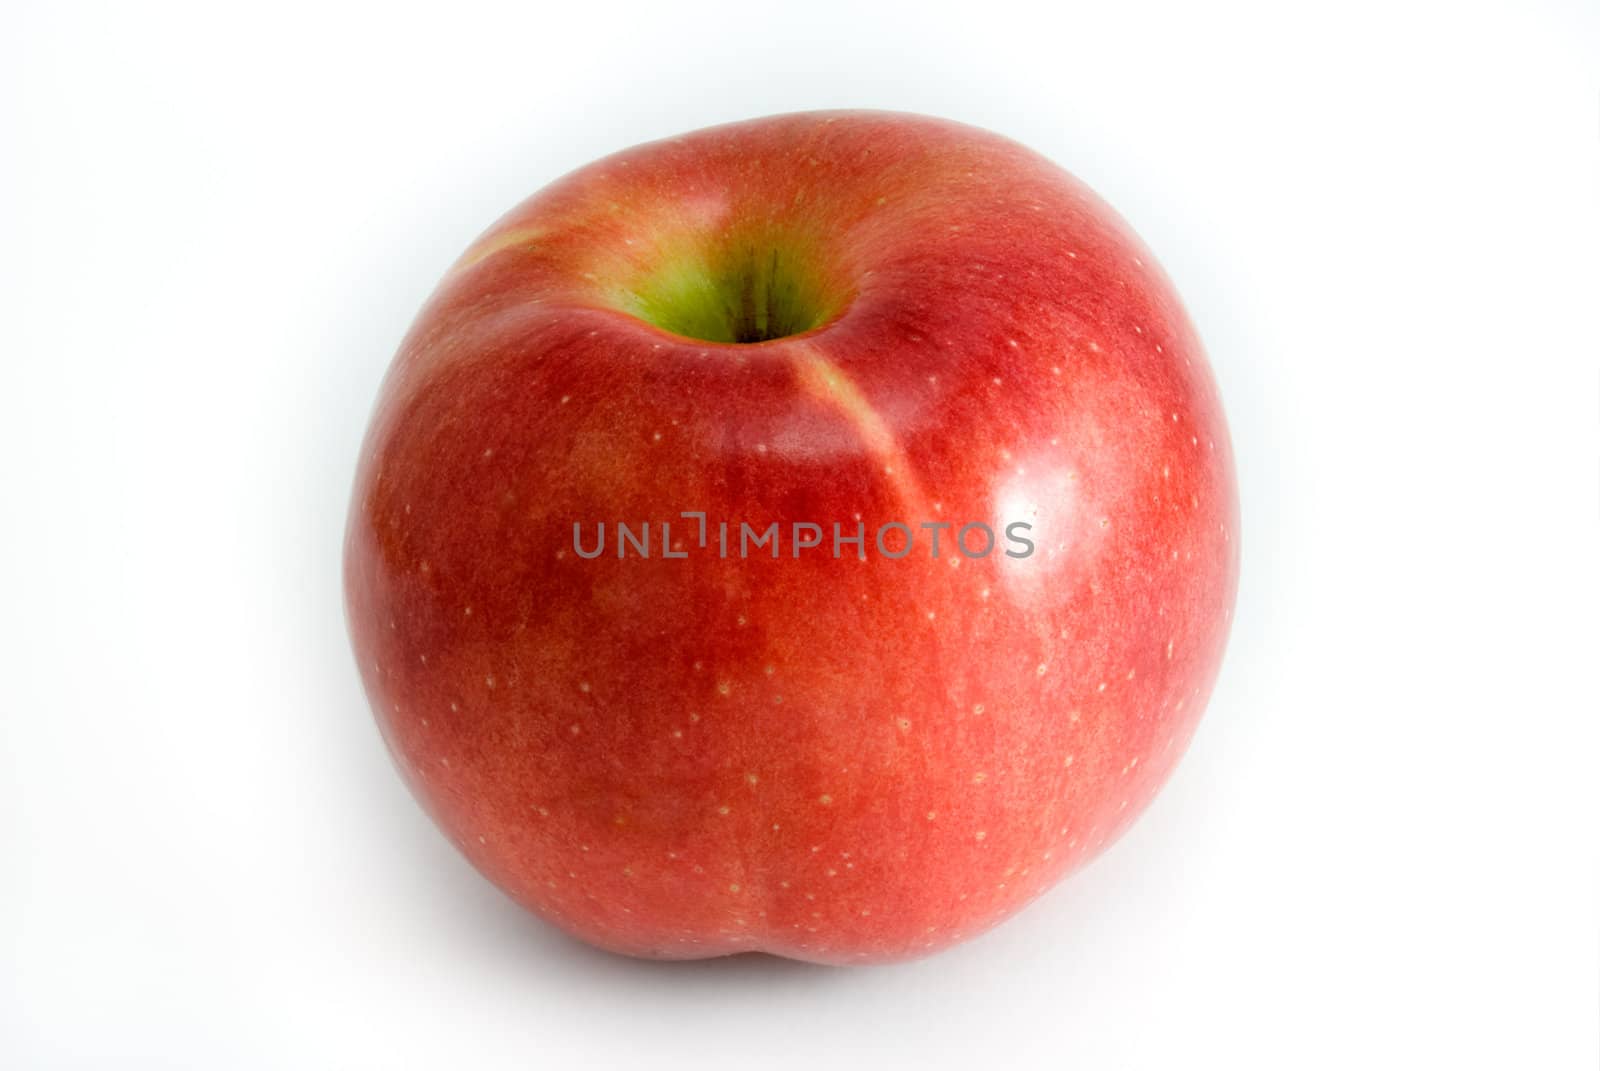  Red apple are photographed on a white background